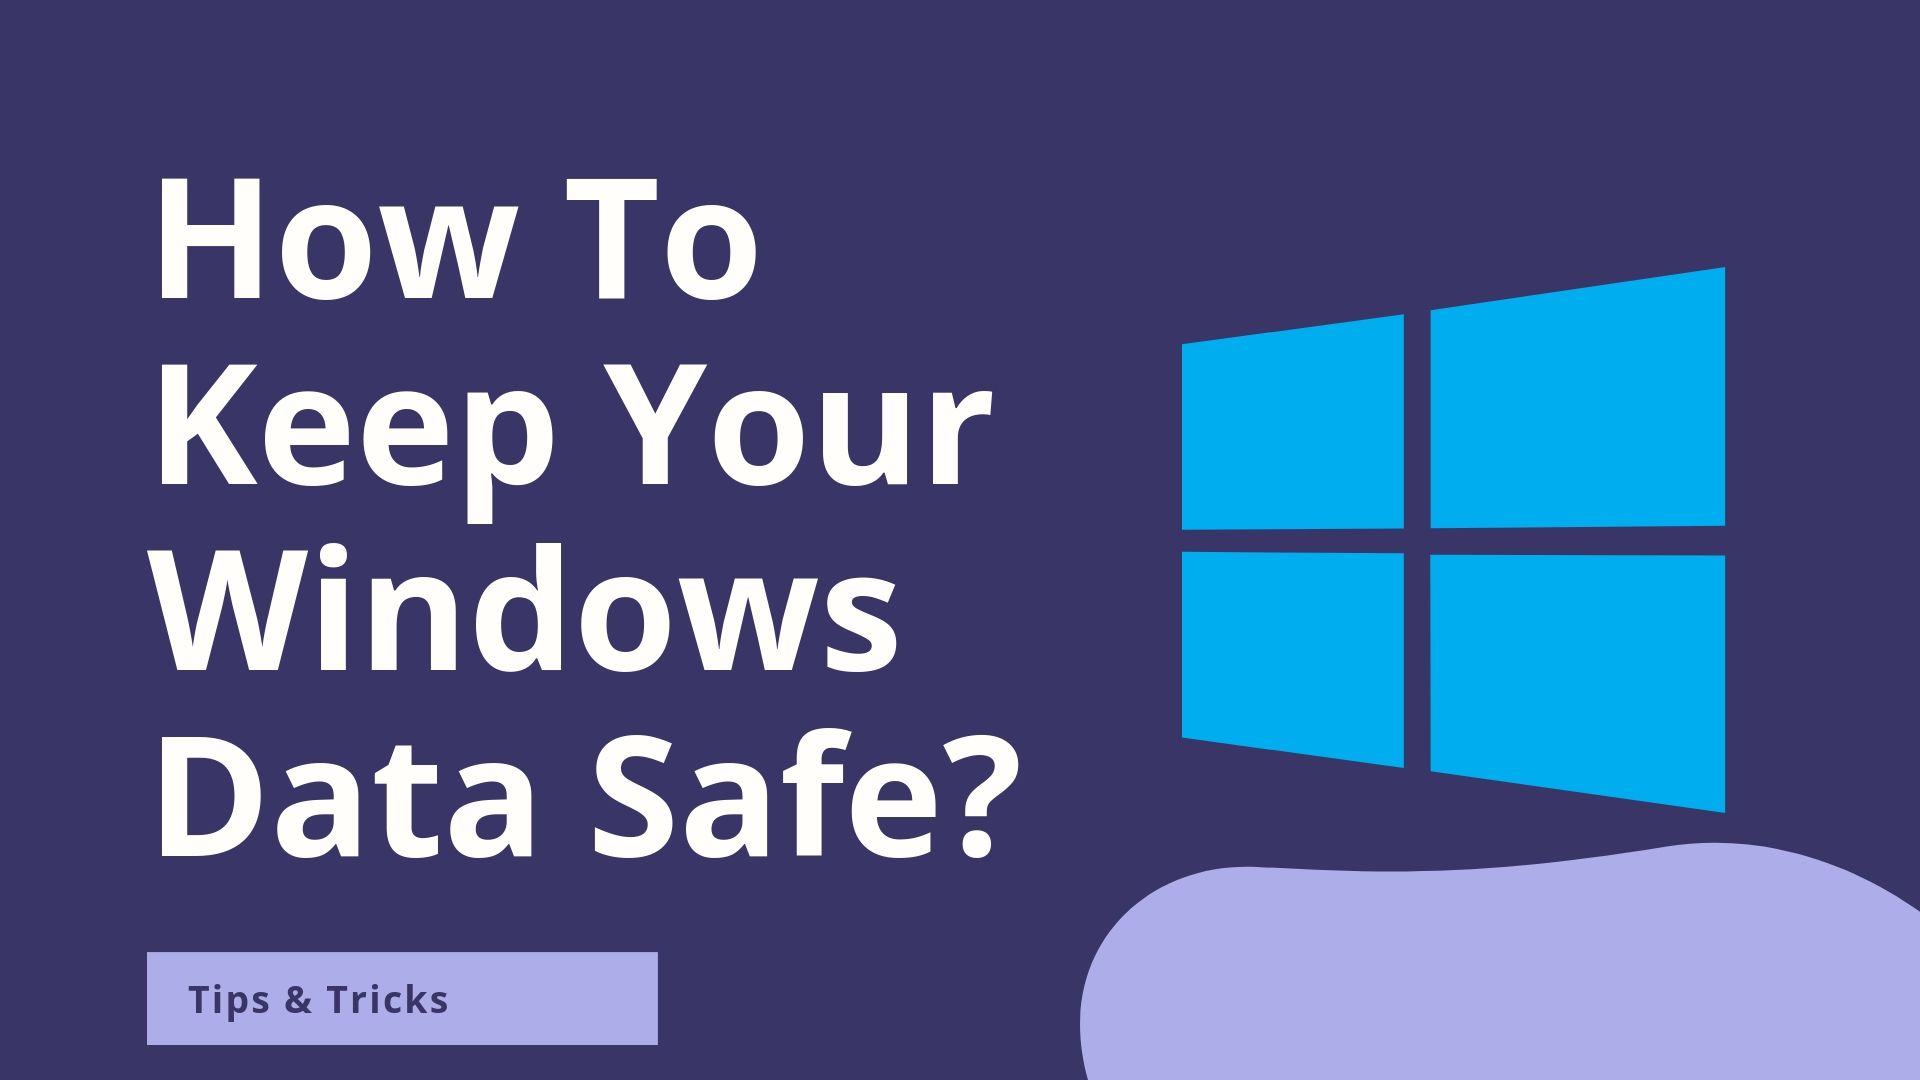 How to keep your windows data safe?